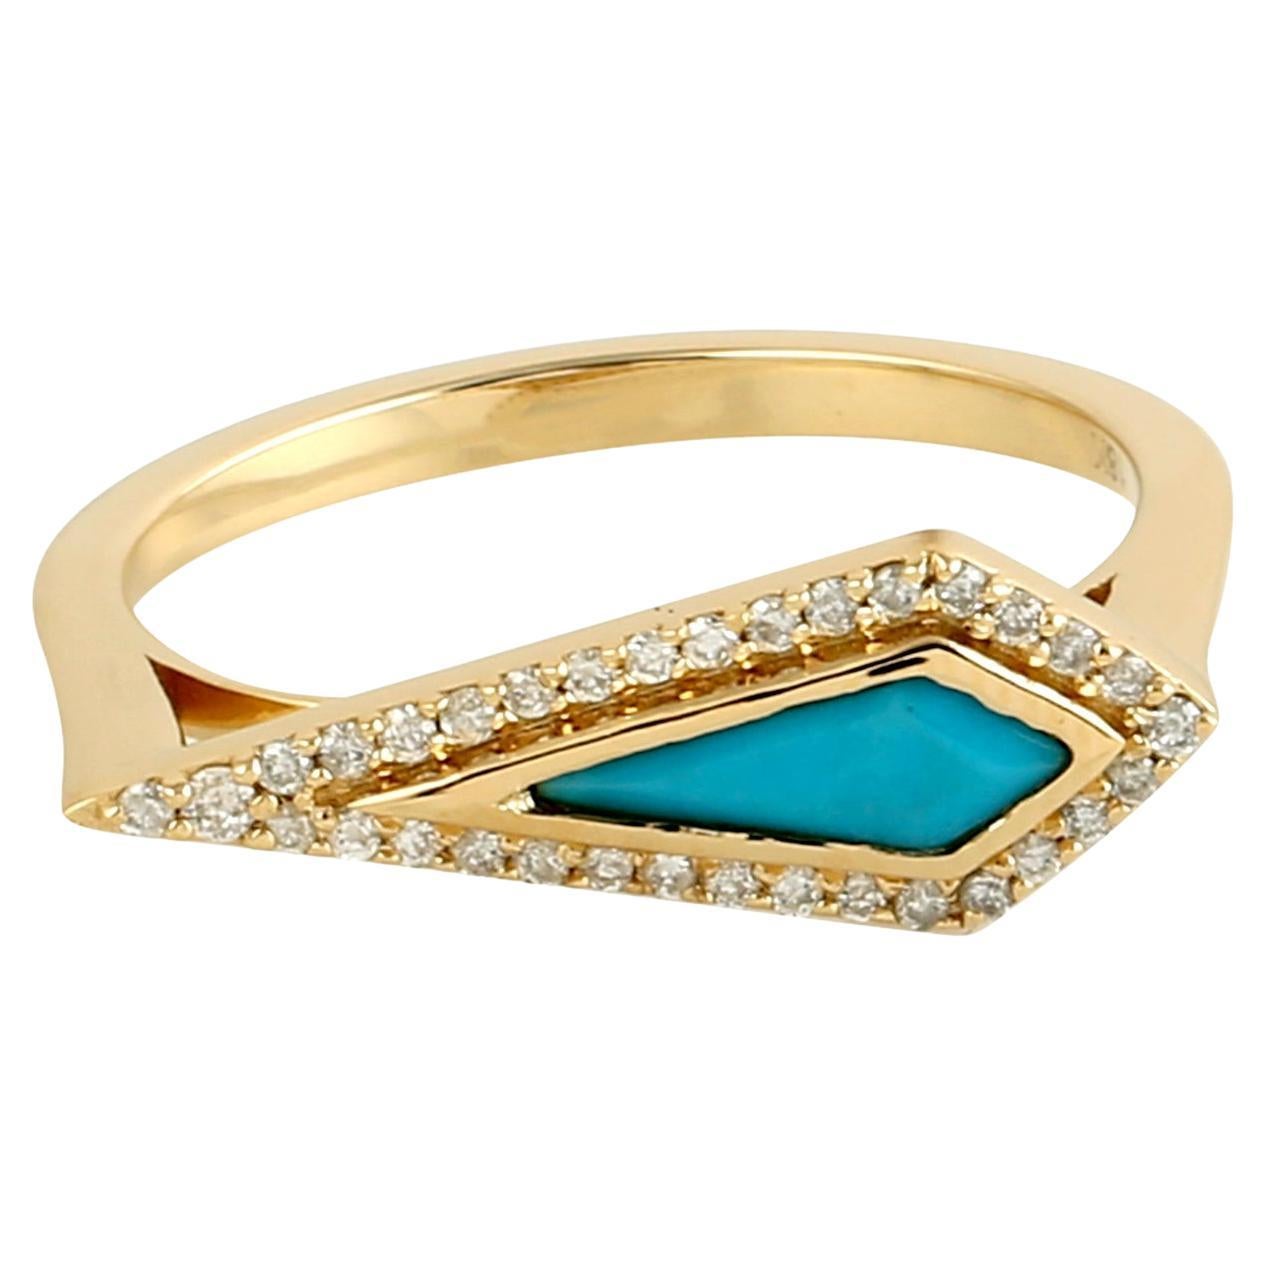 Marquise Shaped Blue Turquoise Cocktail Ring w/ Pave Diamonds In 18k Yellow Gold